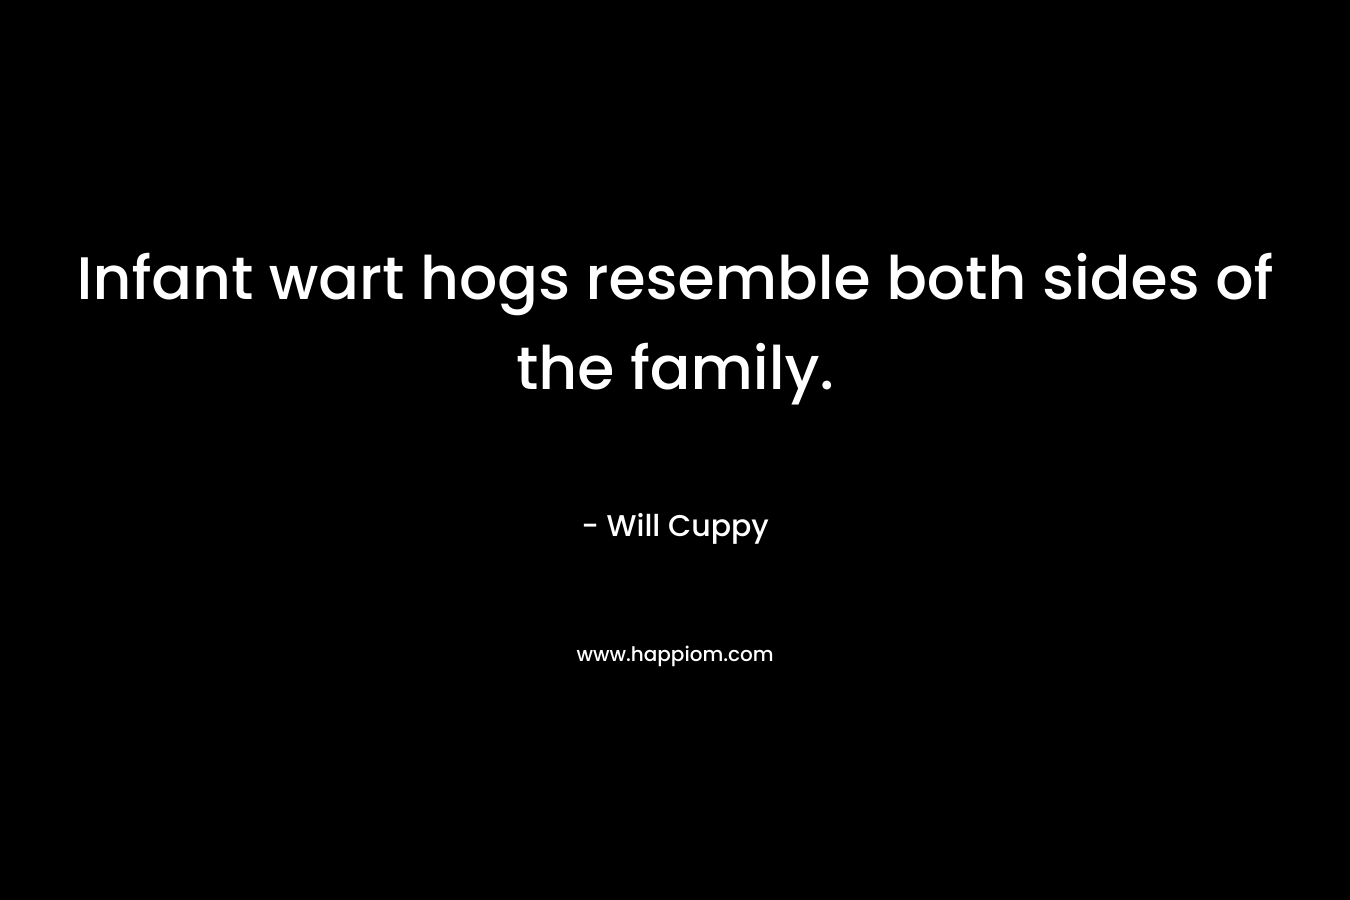 Infant wart hogs resemble both sides of the family. – Will Cuppy